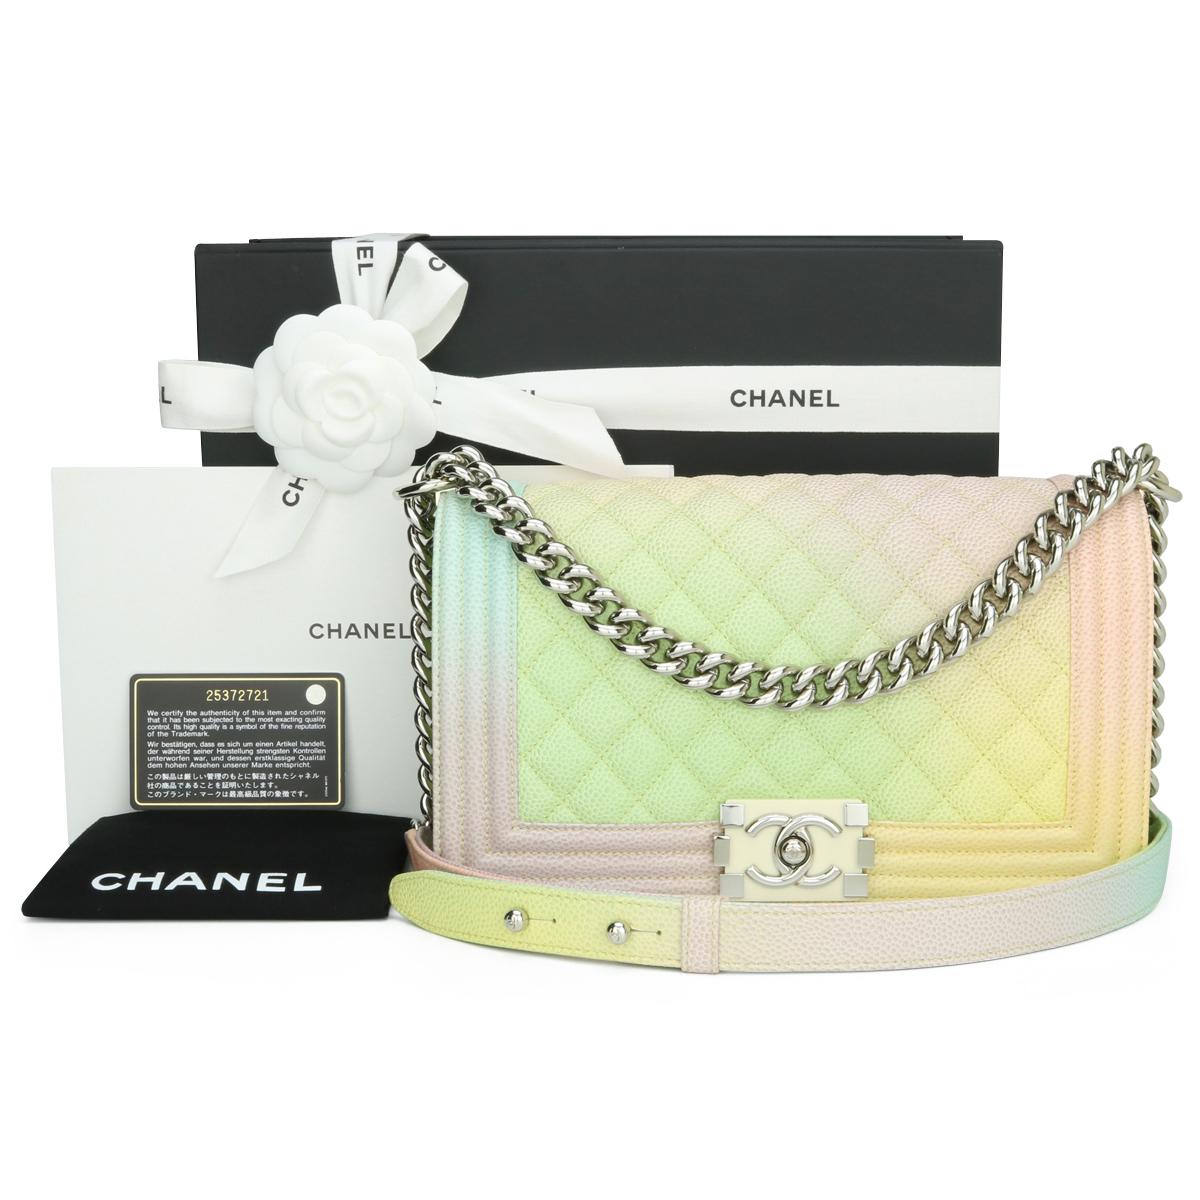 CHANEL Old Medium Boy Bag Rainbow Caviar with Shiny Silver Hardware 2018.

This stunning bag is still in excellent condition, the bag still holds its original shape, and the hardware is still very clean and shiny.

‘Charming, colourful, flirty, and